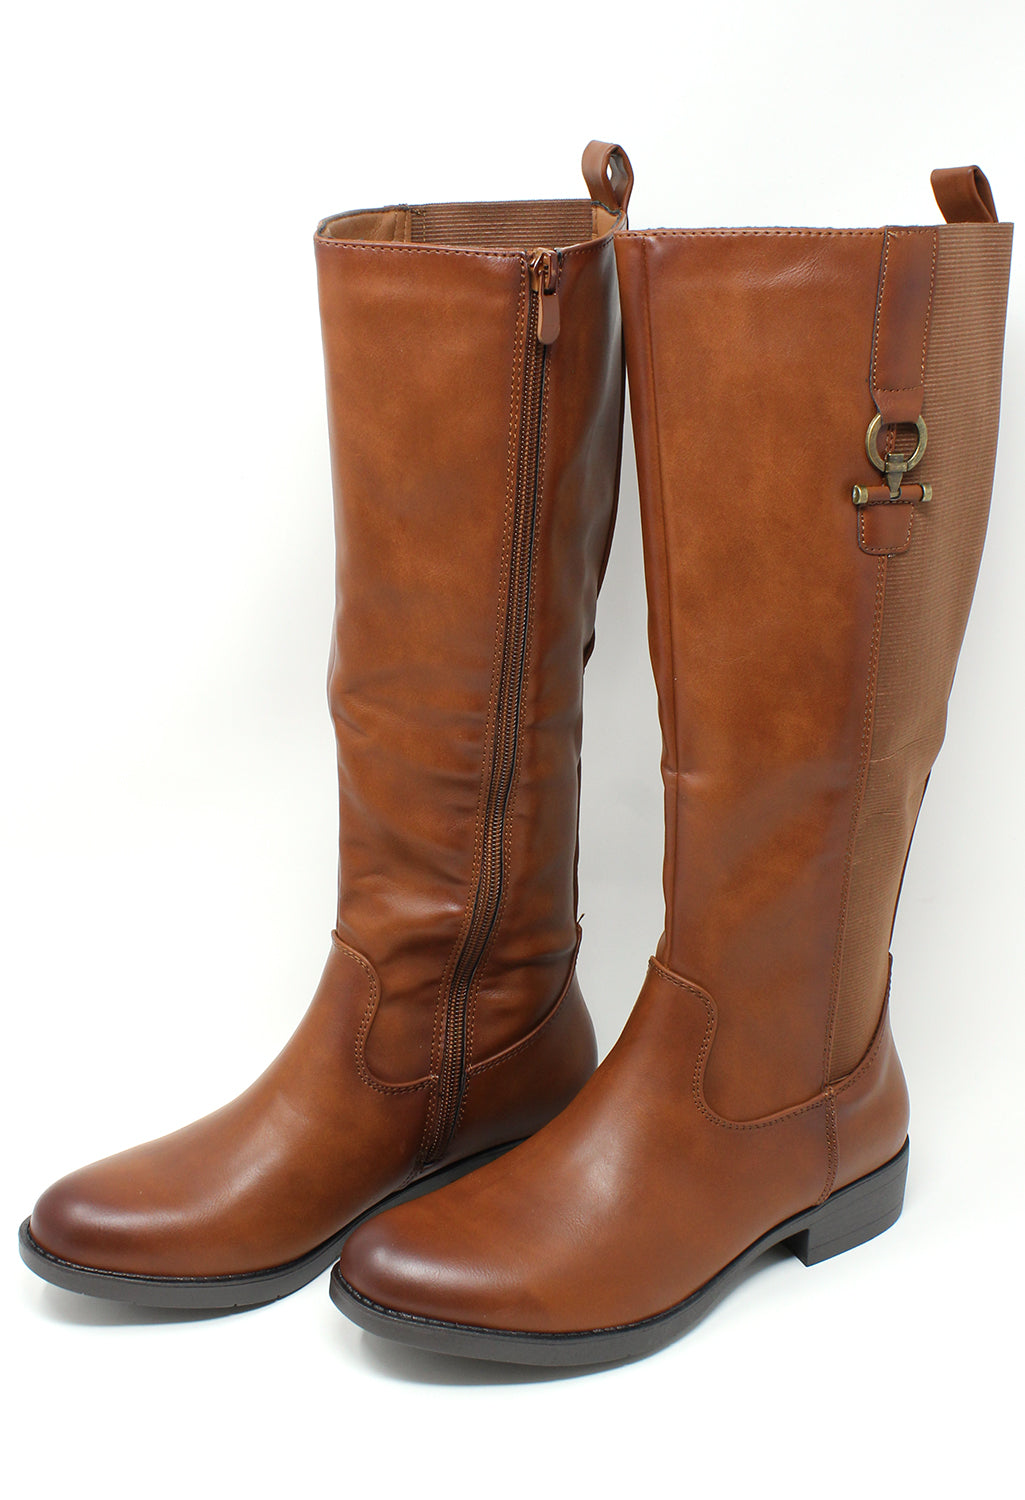 Knee High Riding Boot